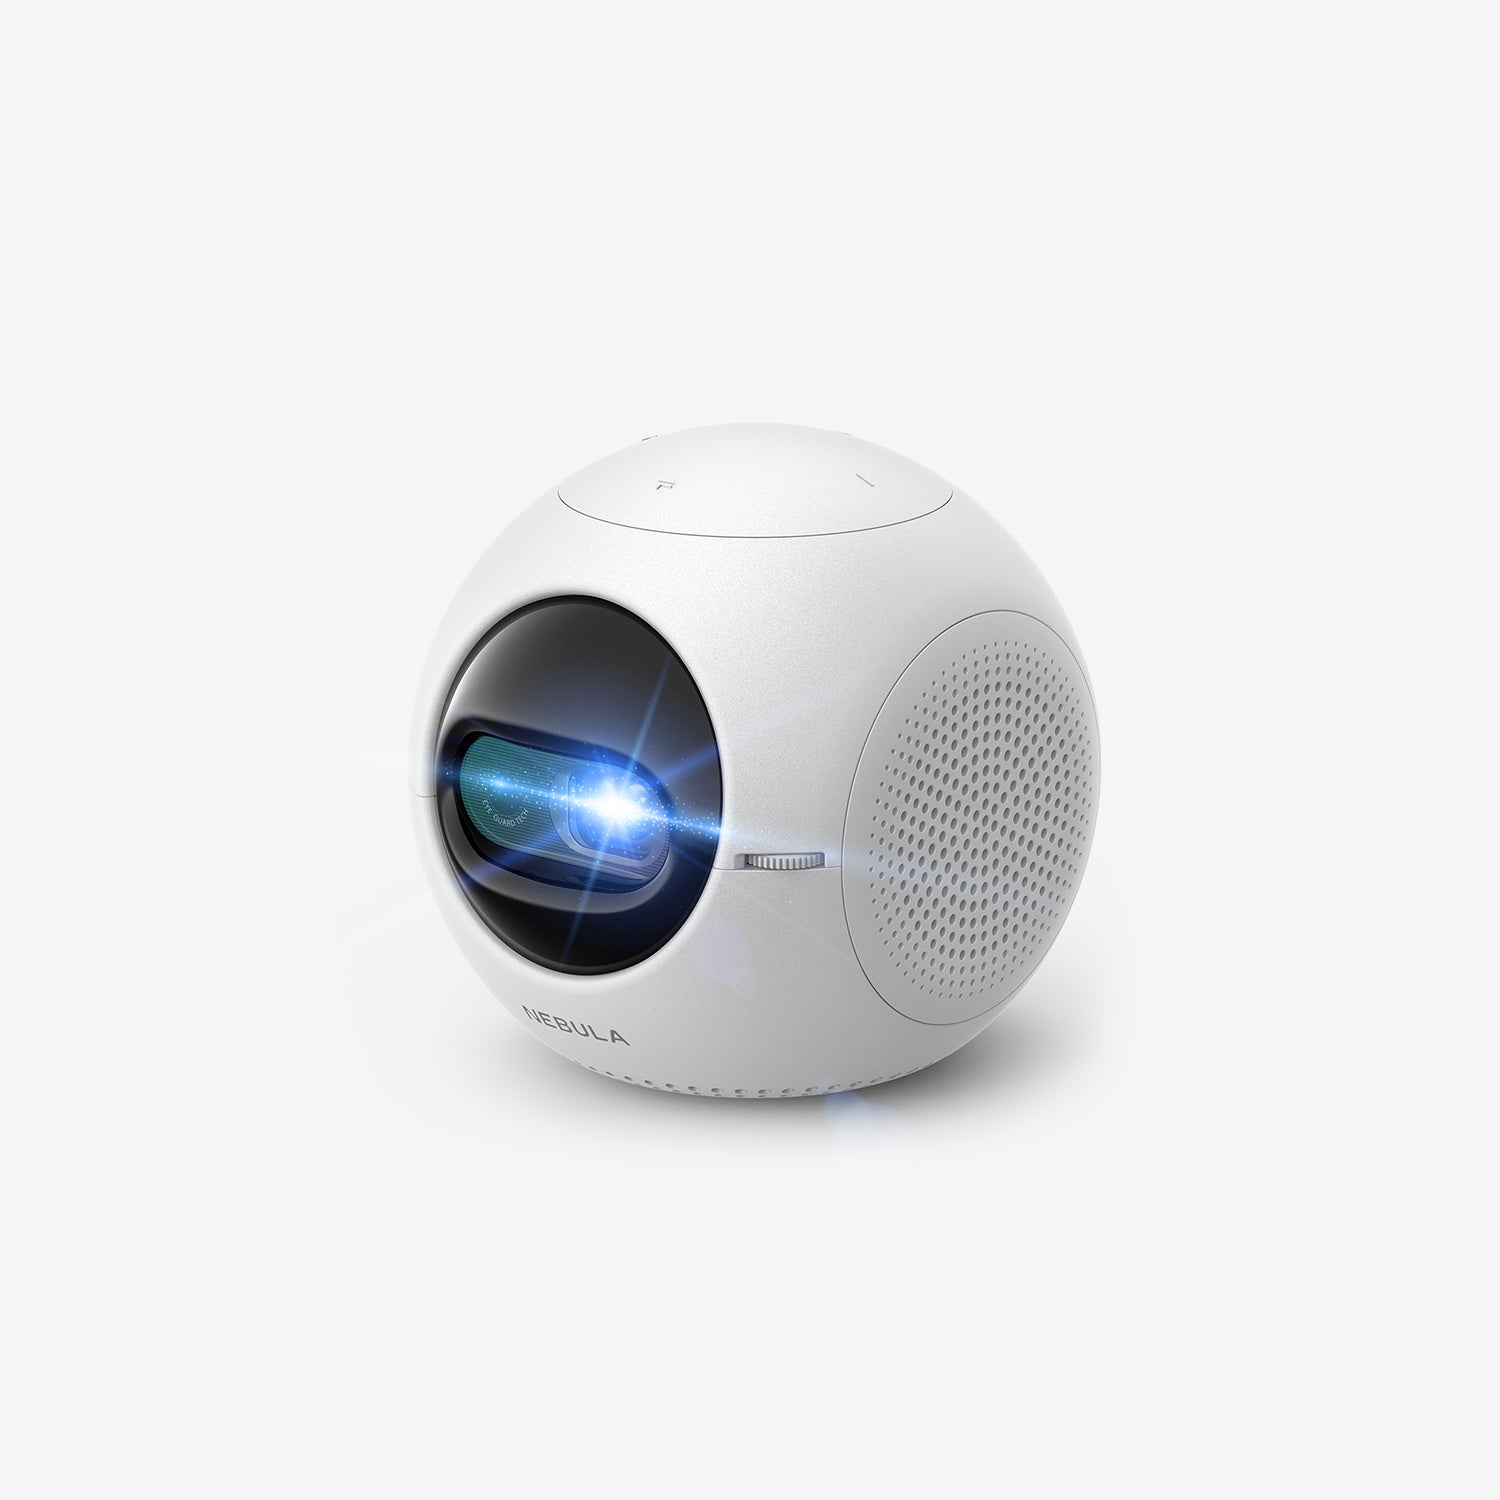 A Nebula Astro portable projector sits in a white room while projecting a blue light off the screen.